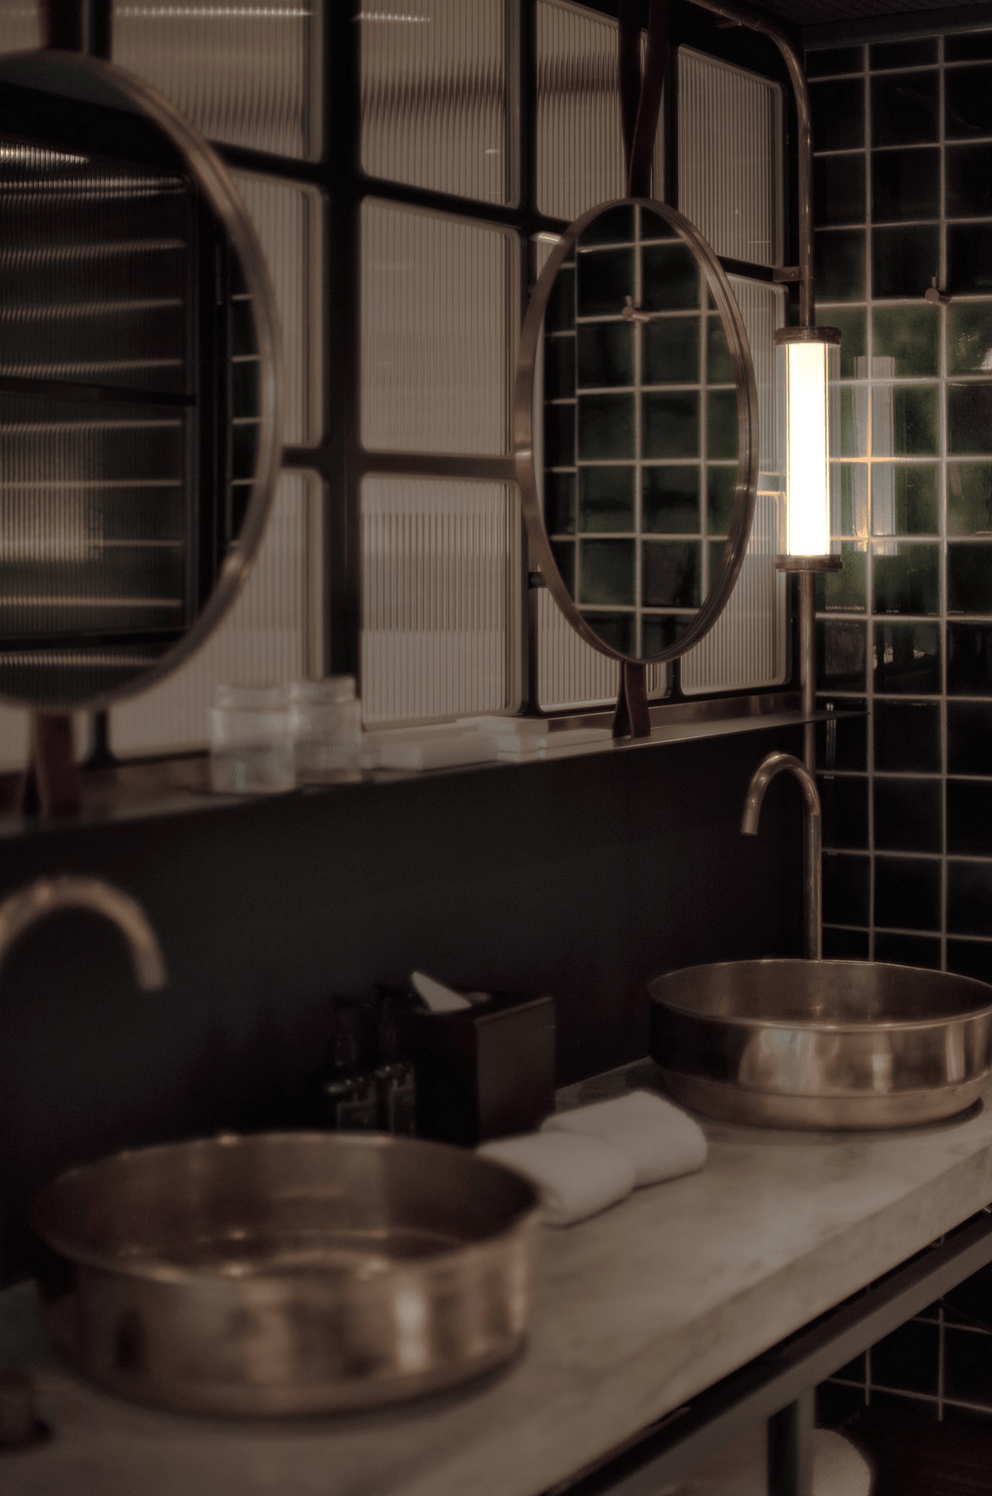 Restaurant Cleanliness – Why Your Restaurant Bathroom Is a Top Priority